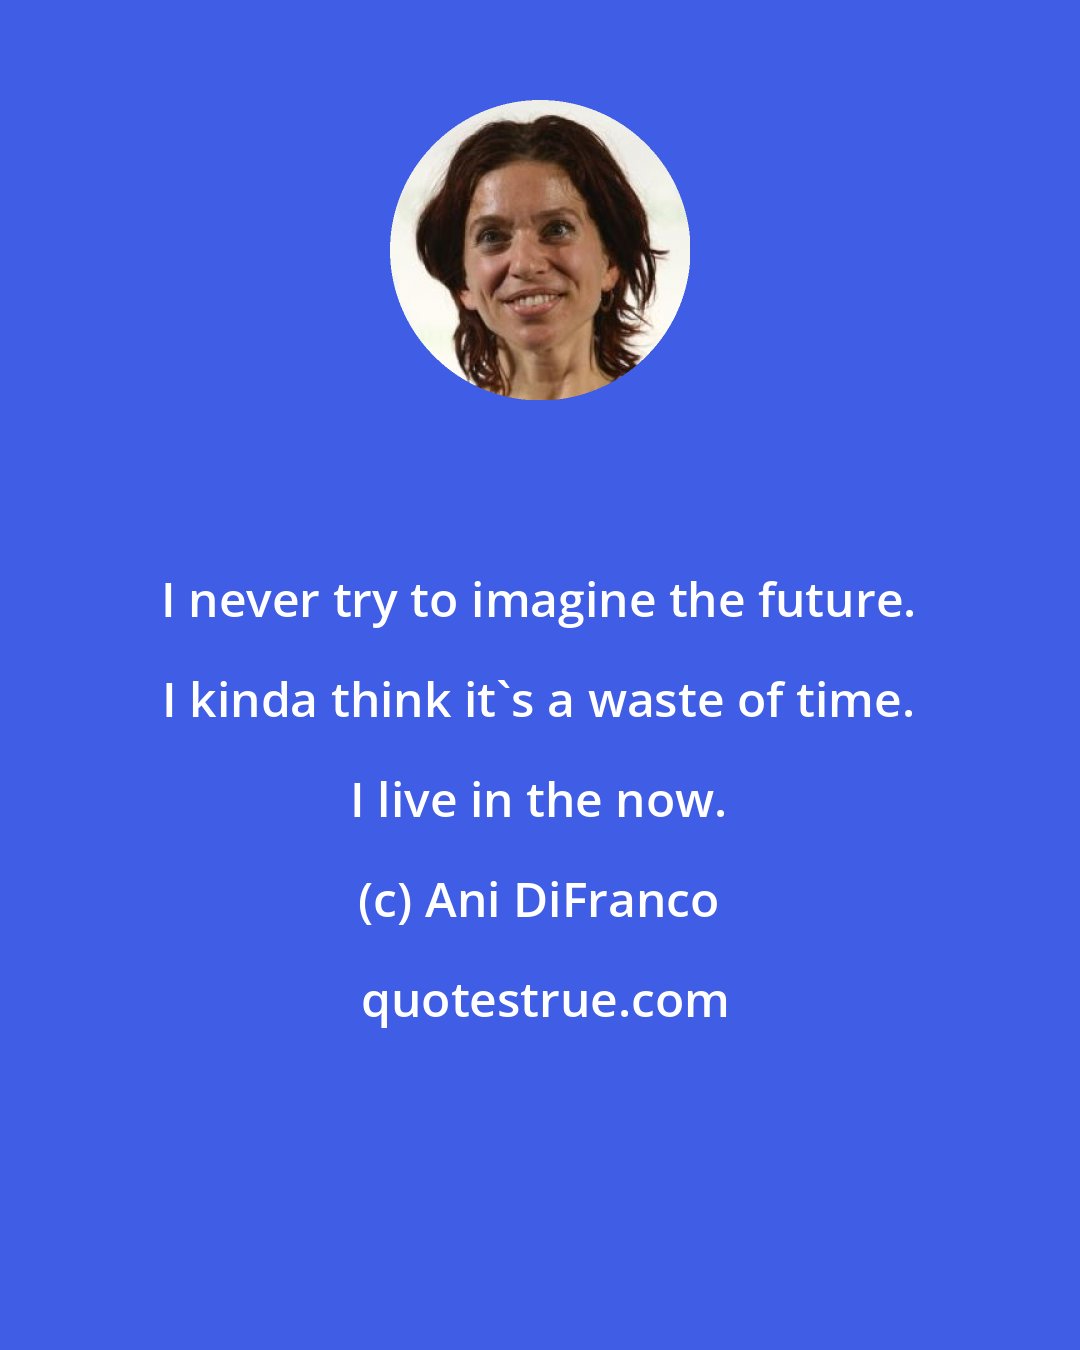 Ani DiFranco: I never try to imagine the future. I kinda think it's a waste of time. I live in the now.